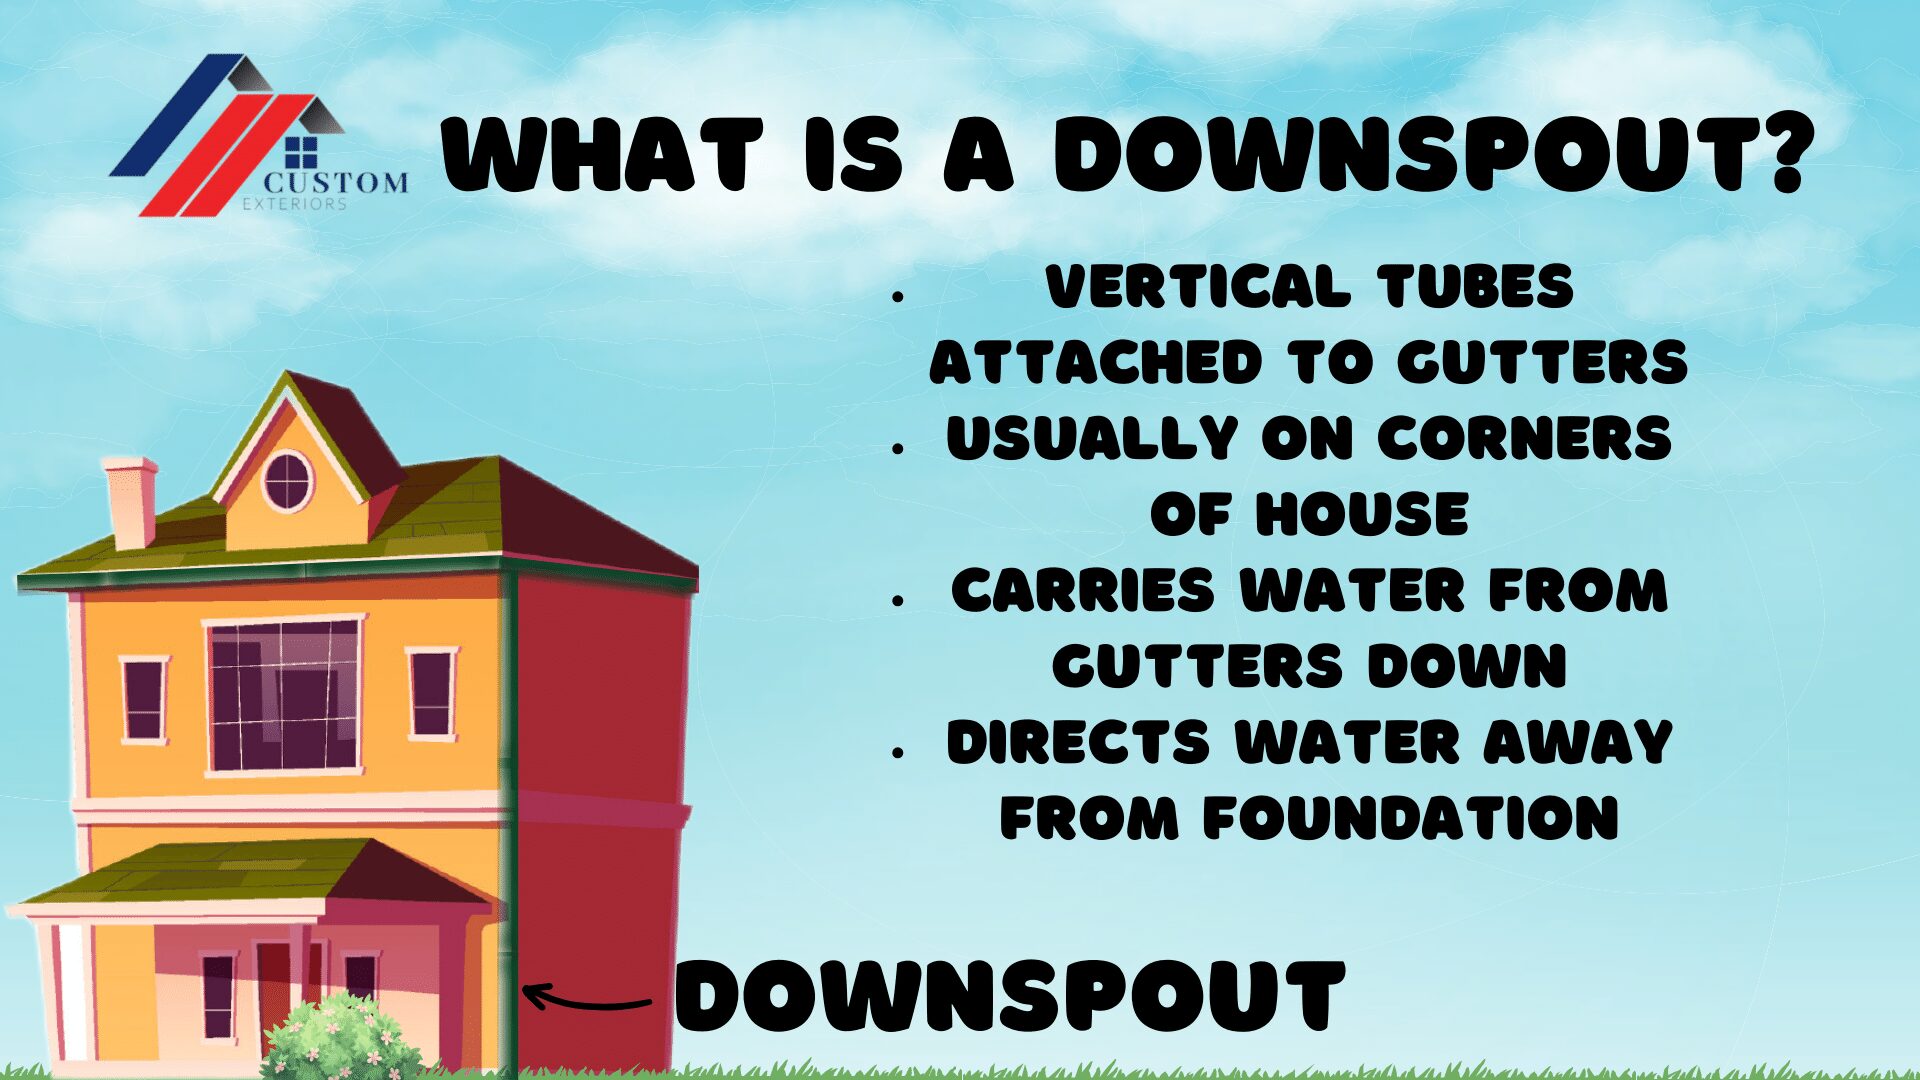 infographic explaining what a downspout is and what purpose it serves on your home